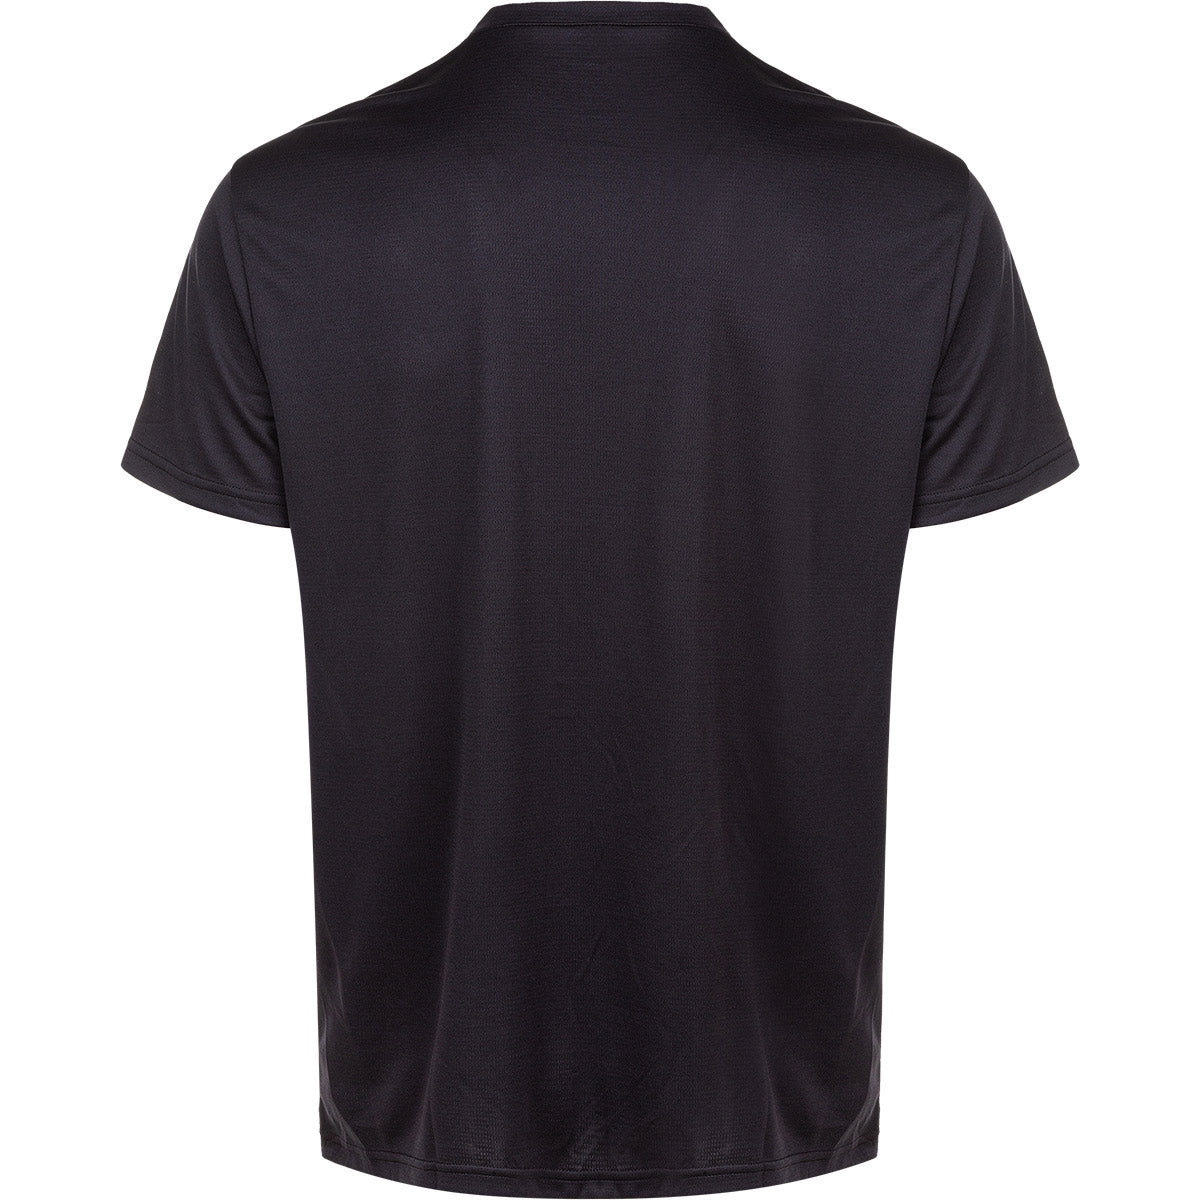 {{product.type}} -ENDURANCE - Mens Vernon Tee - Pancho Michael {{ shop.address.country }}